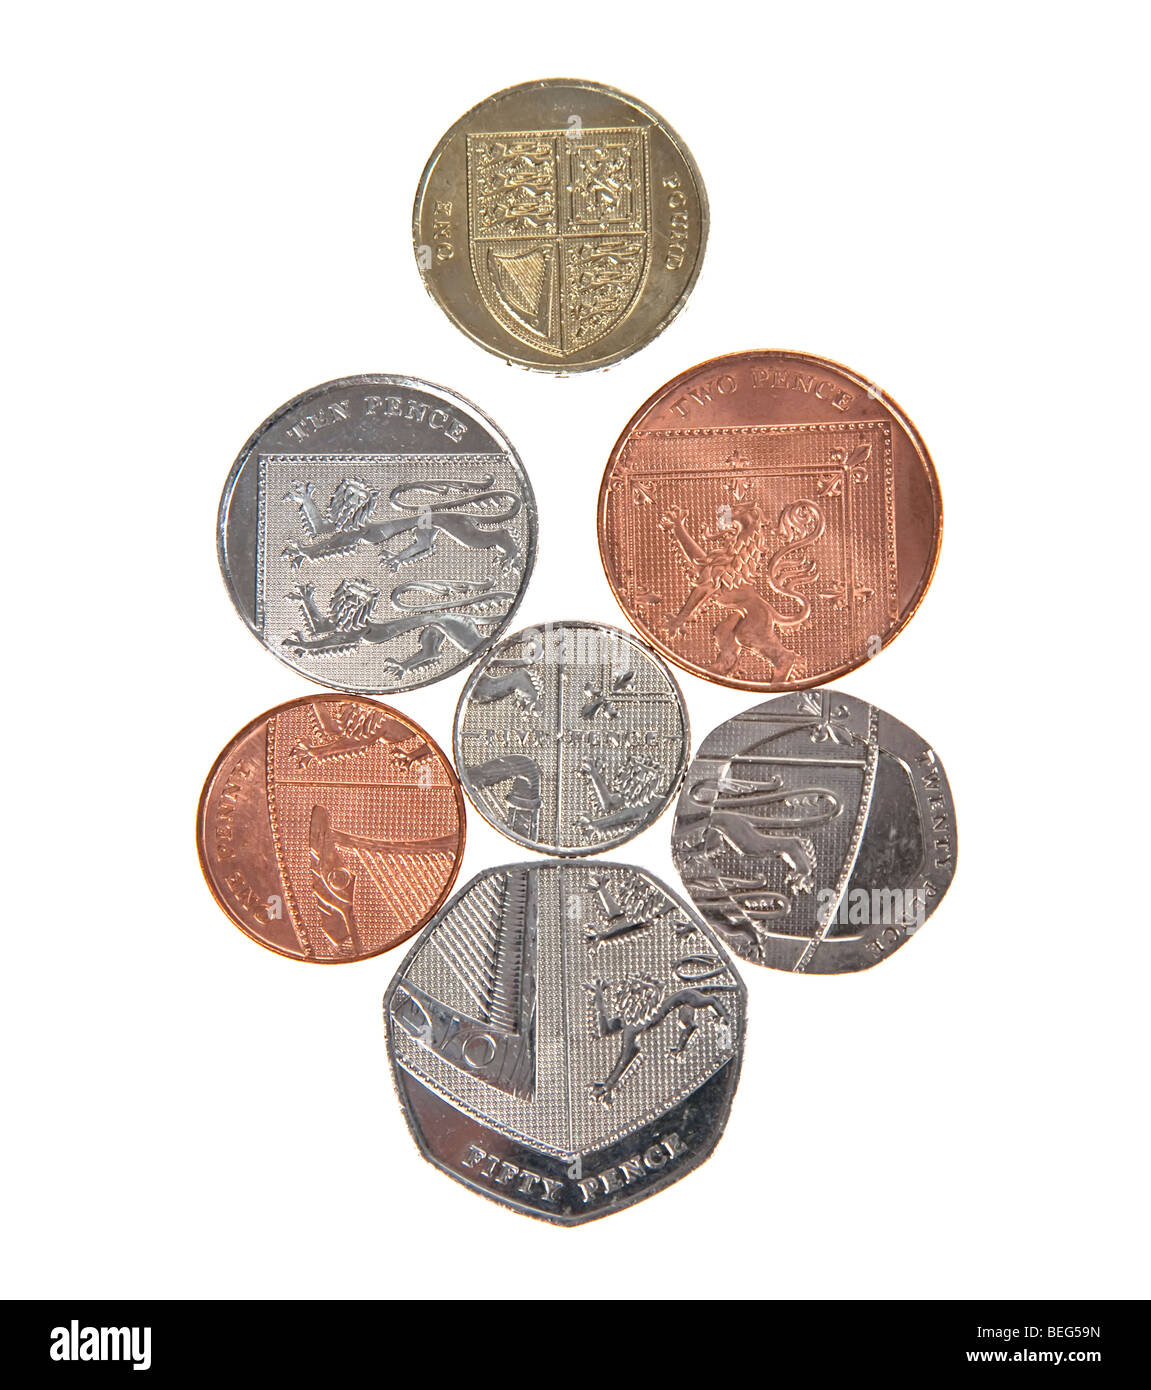 British currency with six denominations representing the pattern of the Royal Arms shown in the £1 coin UK Stock Photo